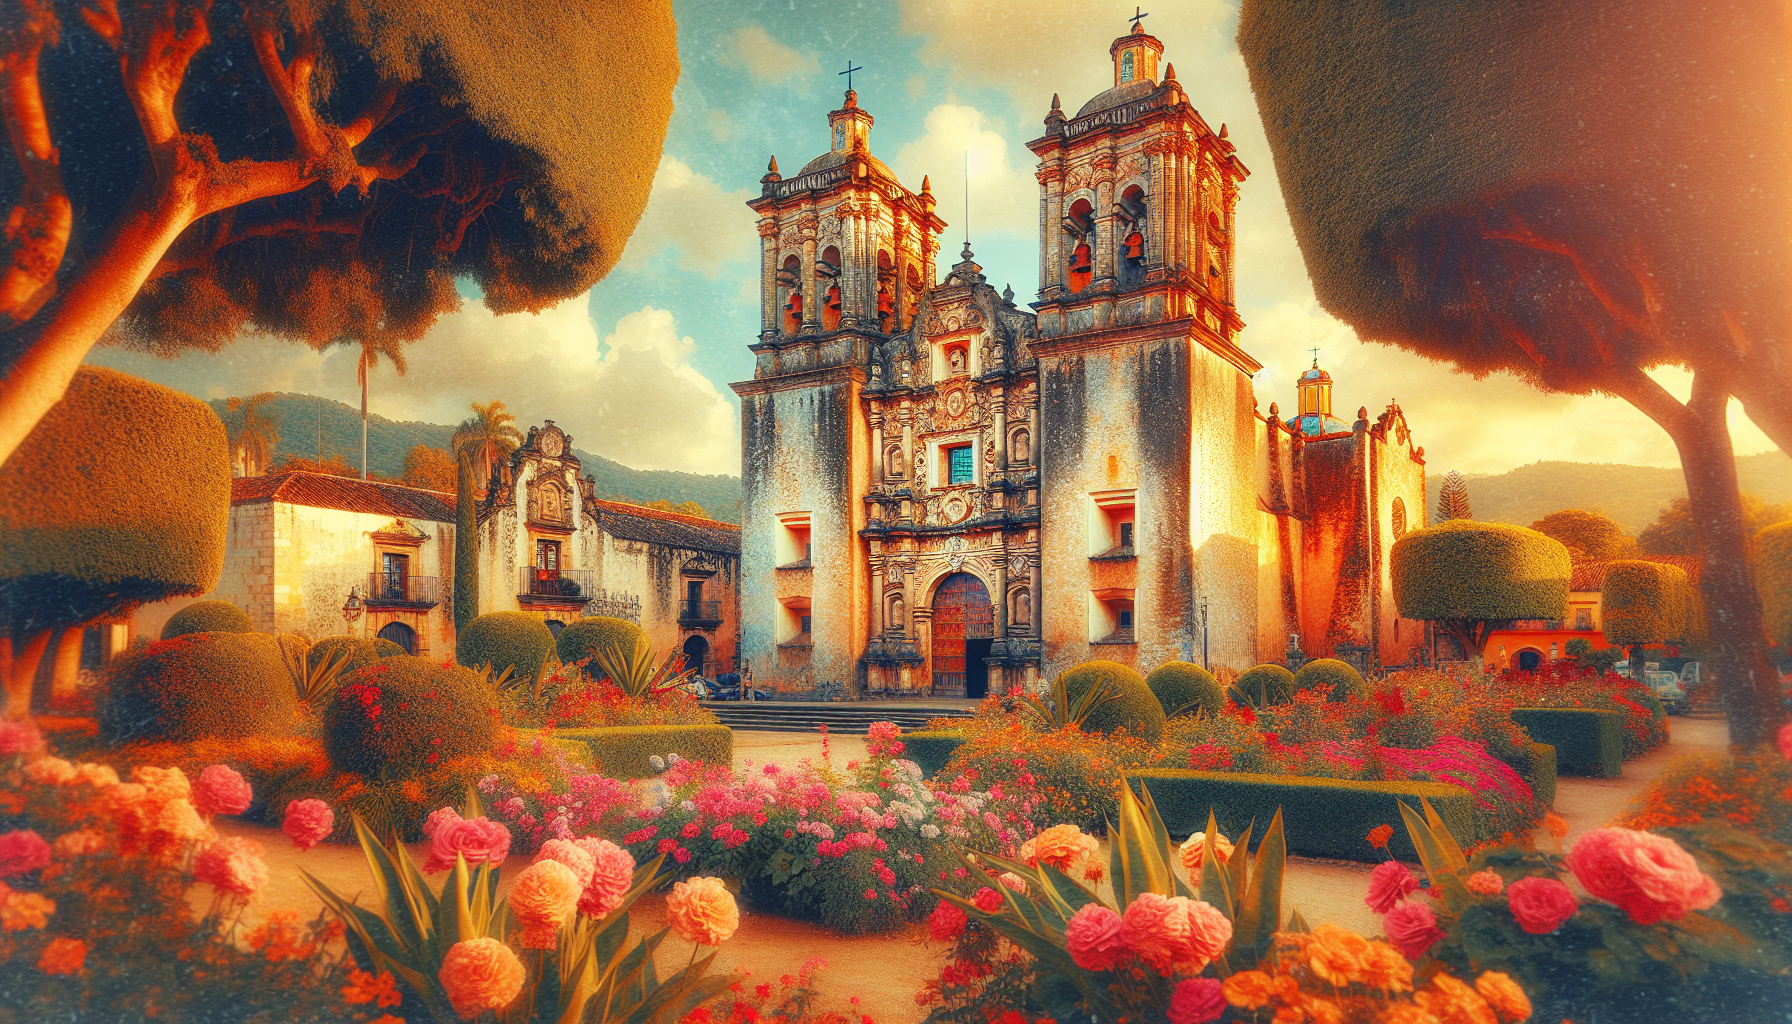 Create an image of a picturesque colonial church in Cuernavaca, Mexico, surrounded by vibrant flowers and lush greenery. The church should be bathed in warm sunlight, showcasing its intricate architec